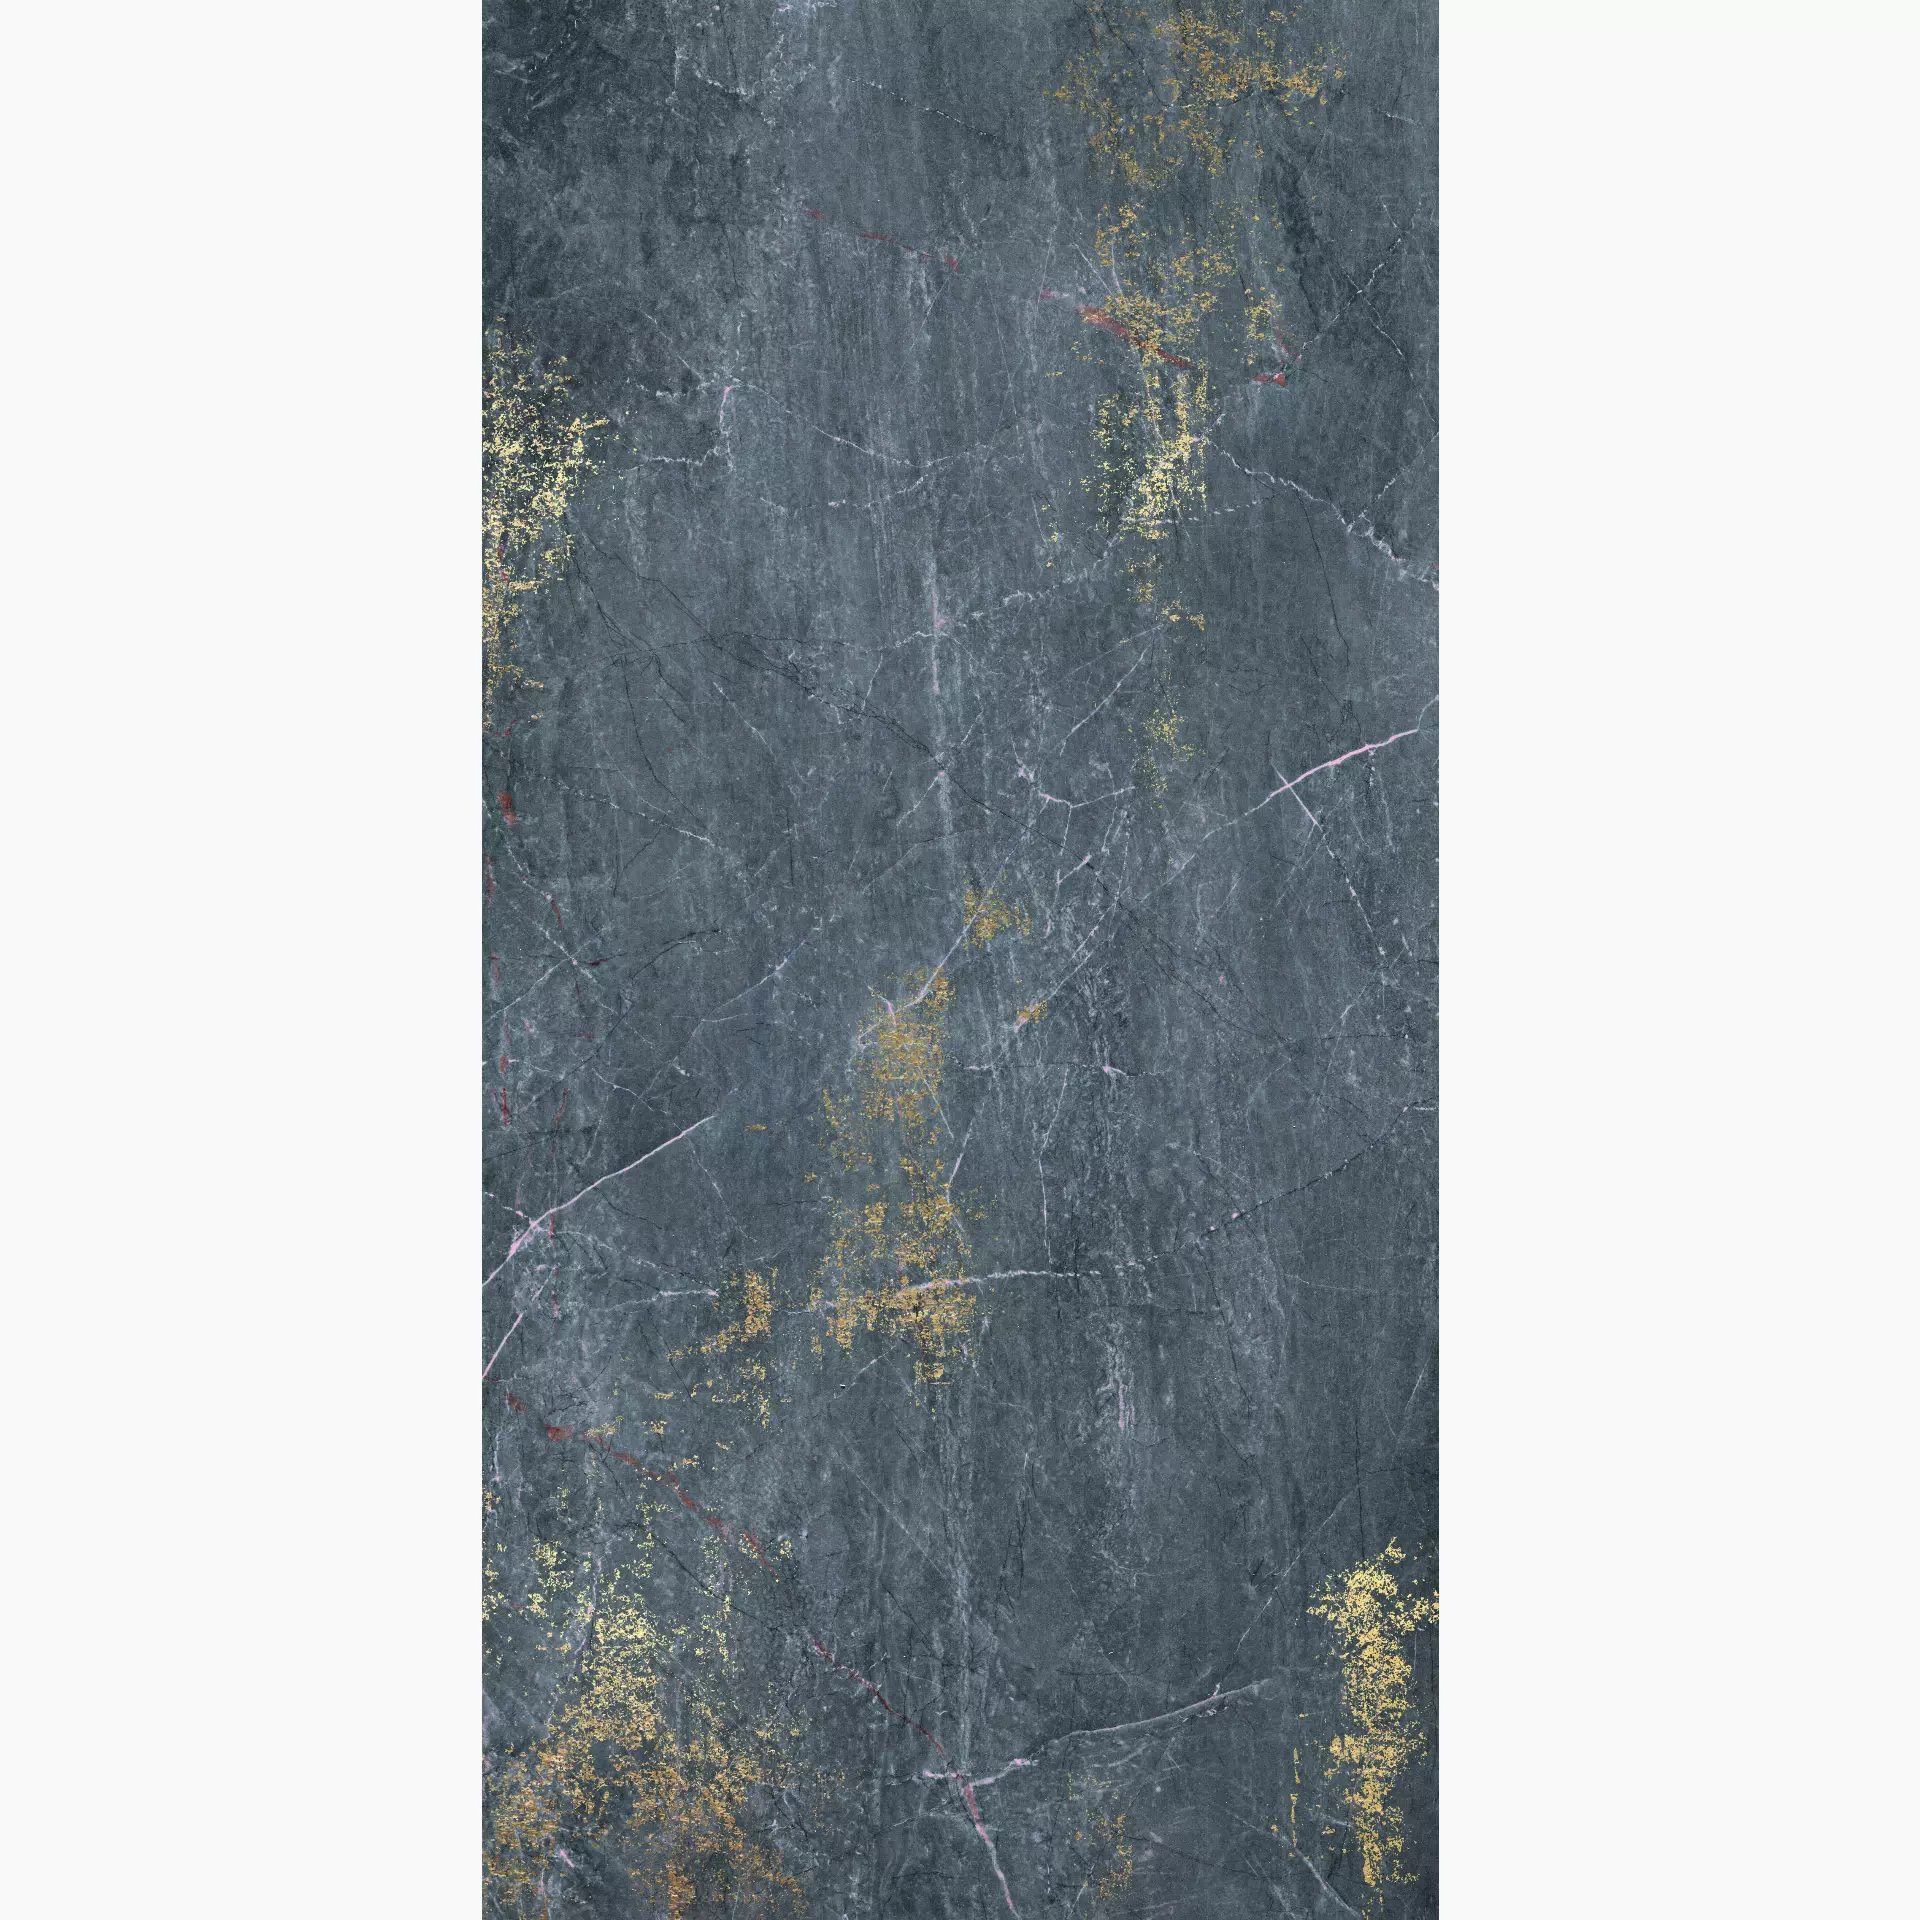 Serenissima Fossil Piombo Lux Inserto Gold 1069622 60x120cm rectified